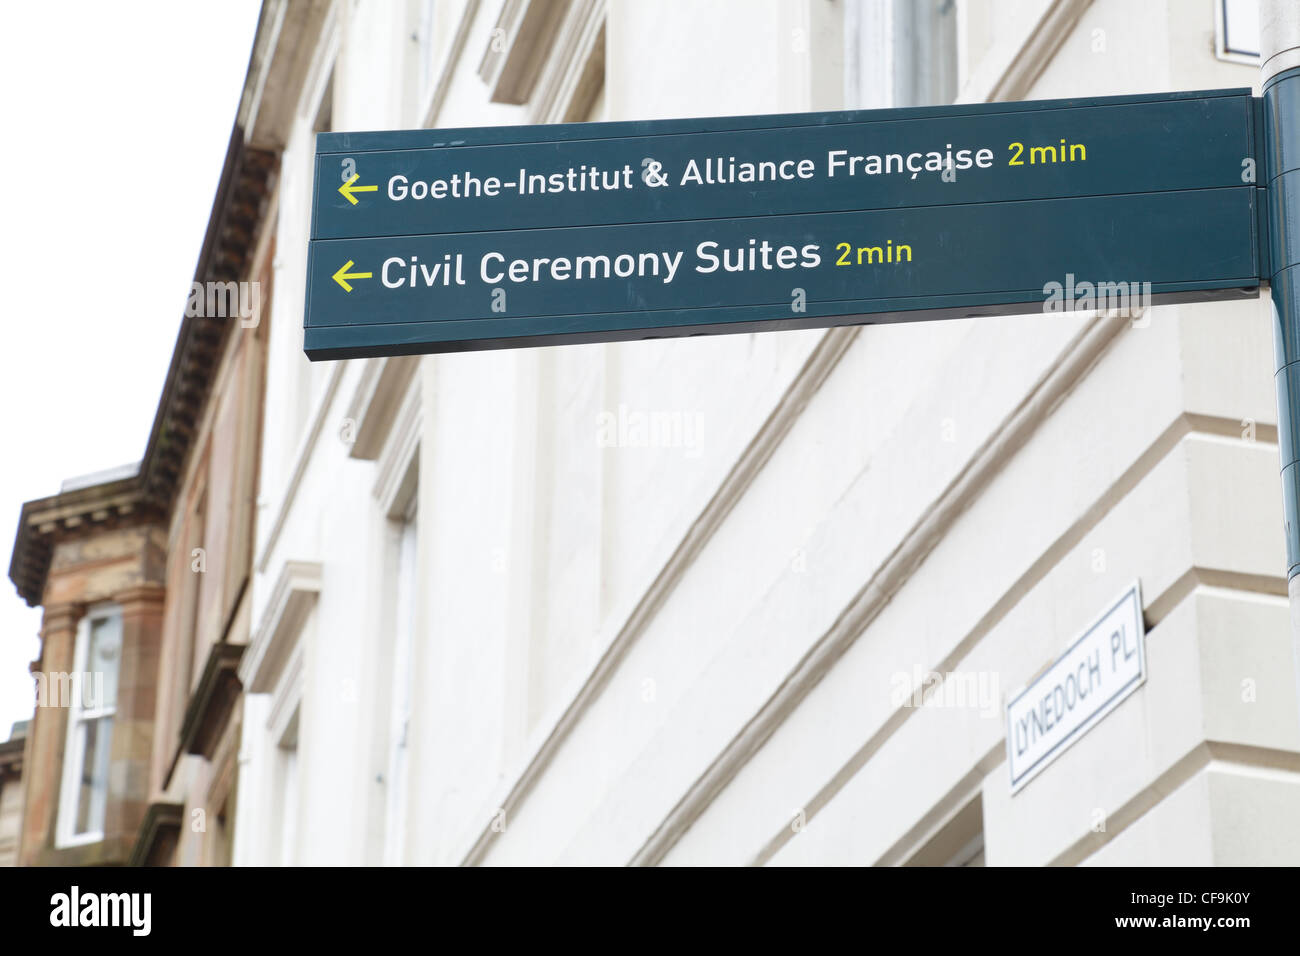 These Civil Ceremony Suites are permanently closed. Goethe-Institut, Alliance Francaise and Civil Ceremony Suite direction sign, Glasgow, Scotland, UK Stock Photo